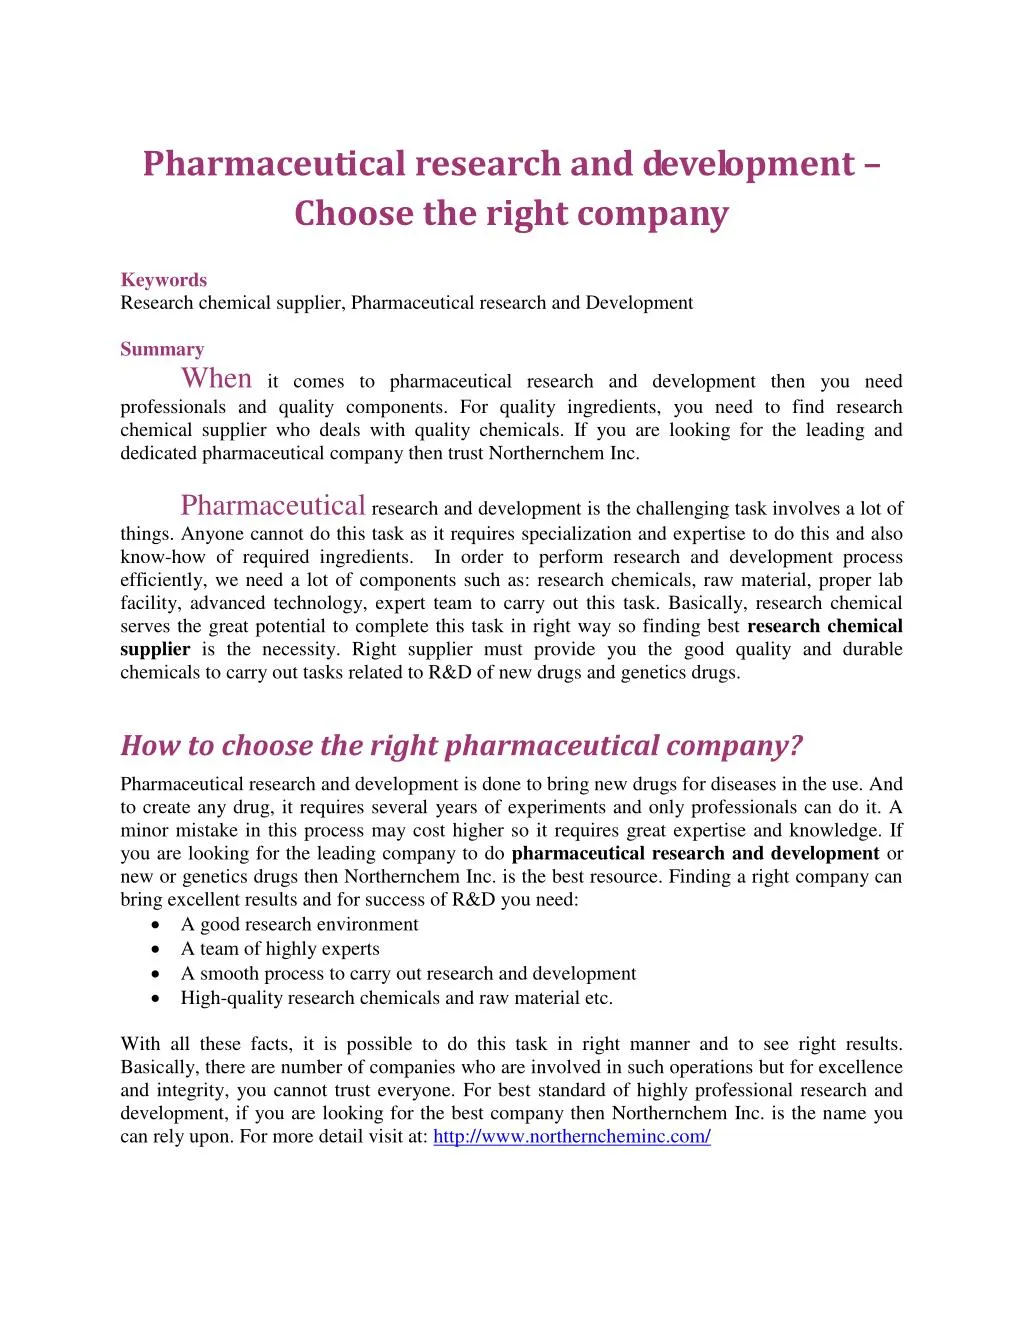 pharmaceutical research and development choose